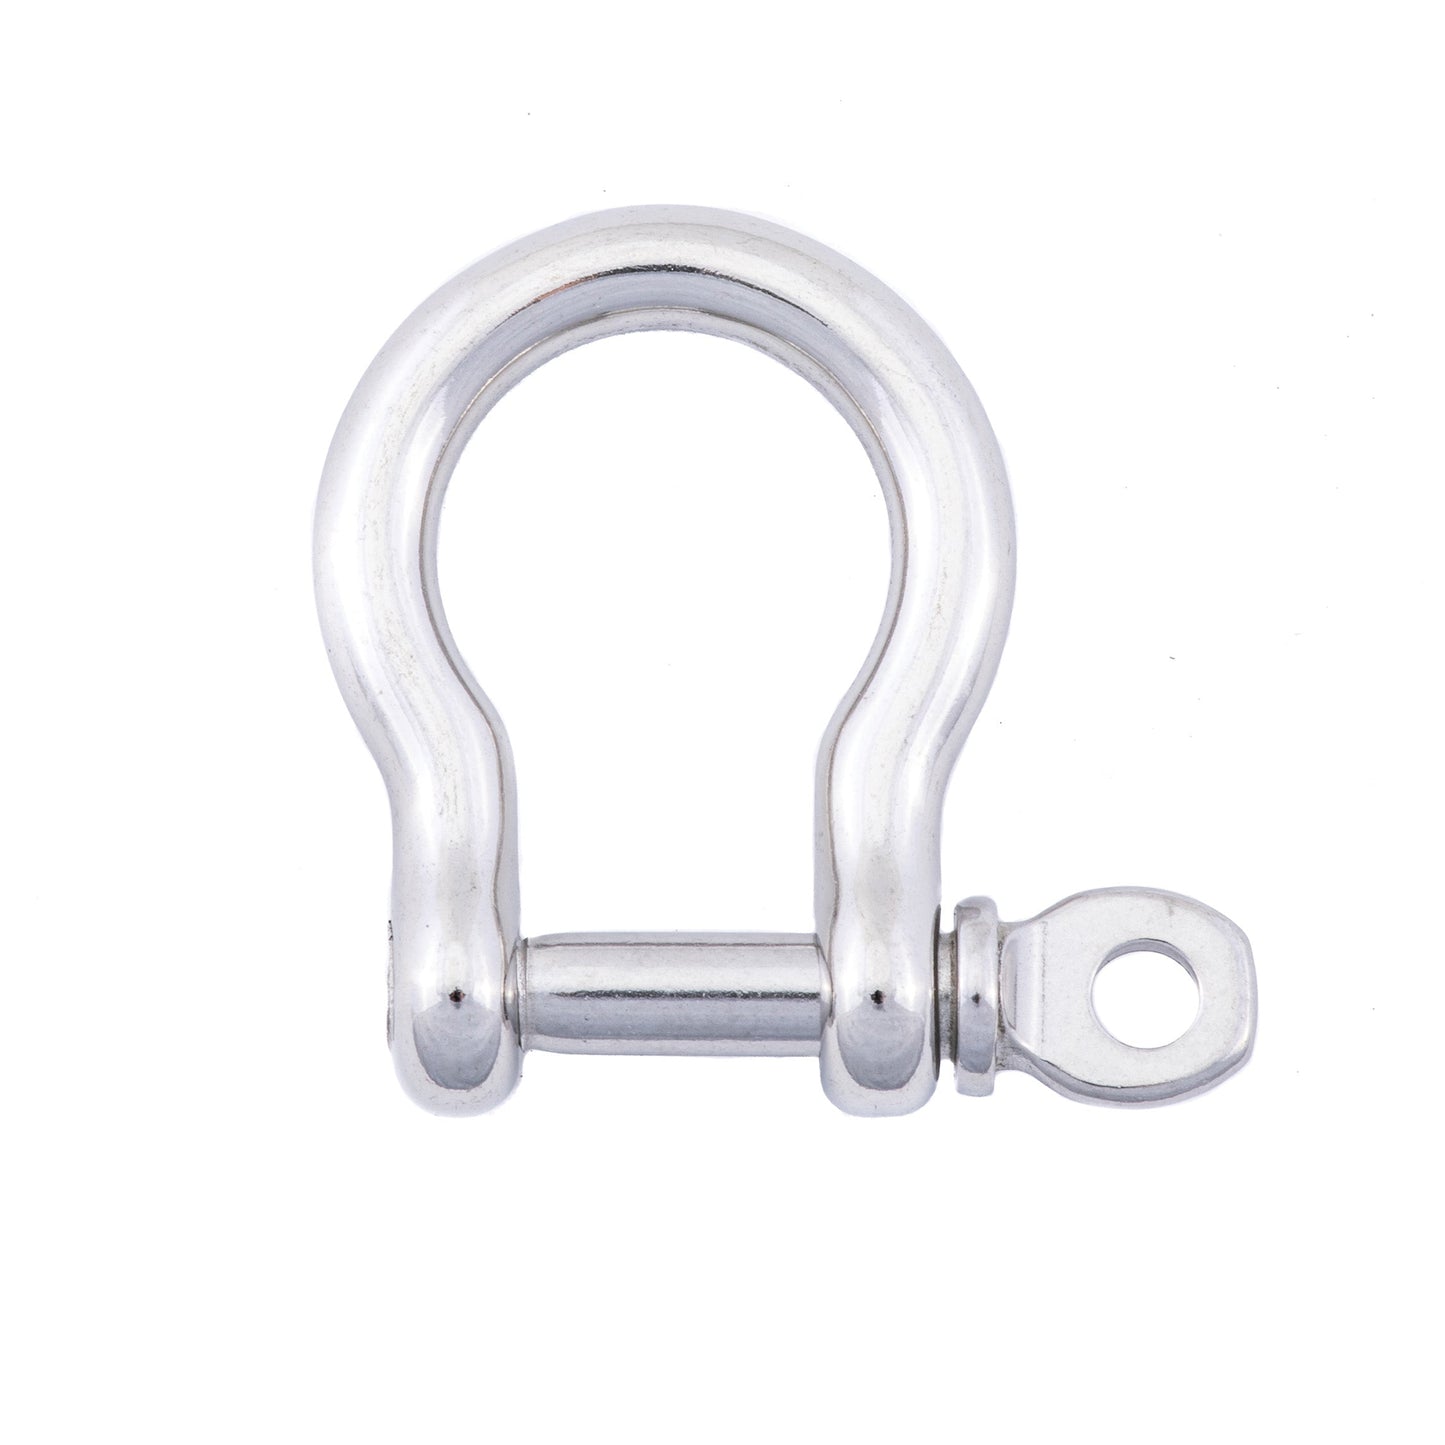 1/2" Stainless Steel Shackle